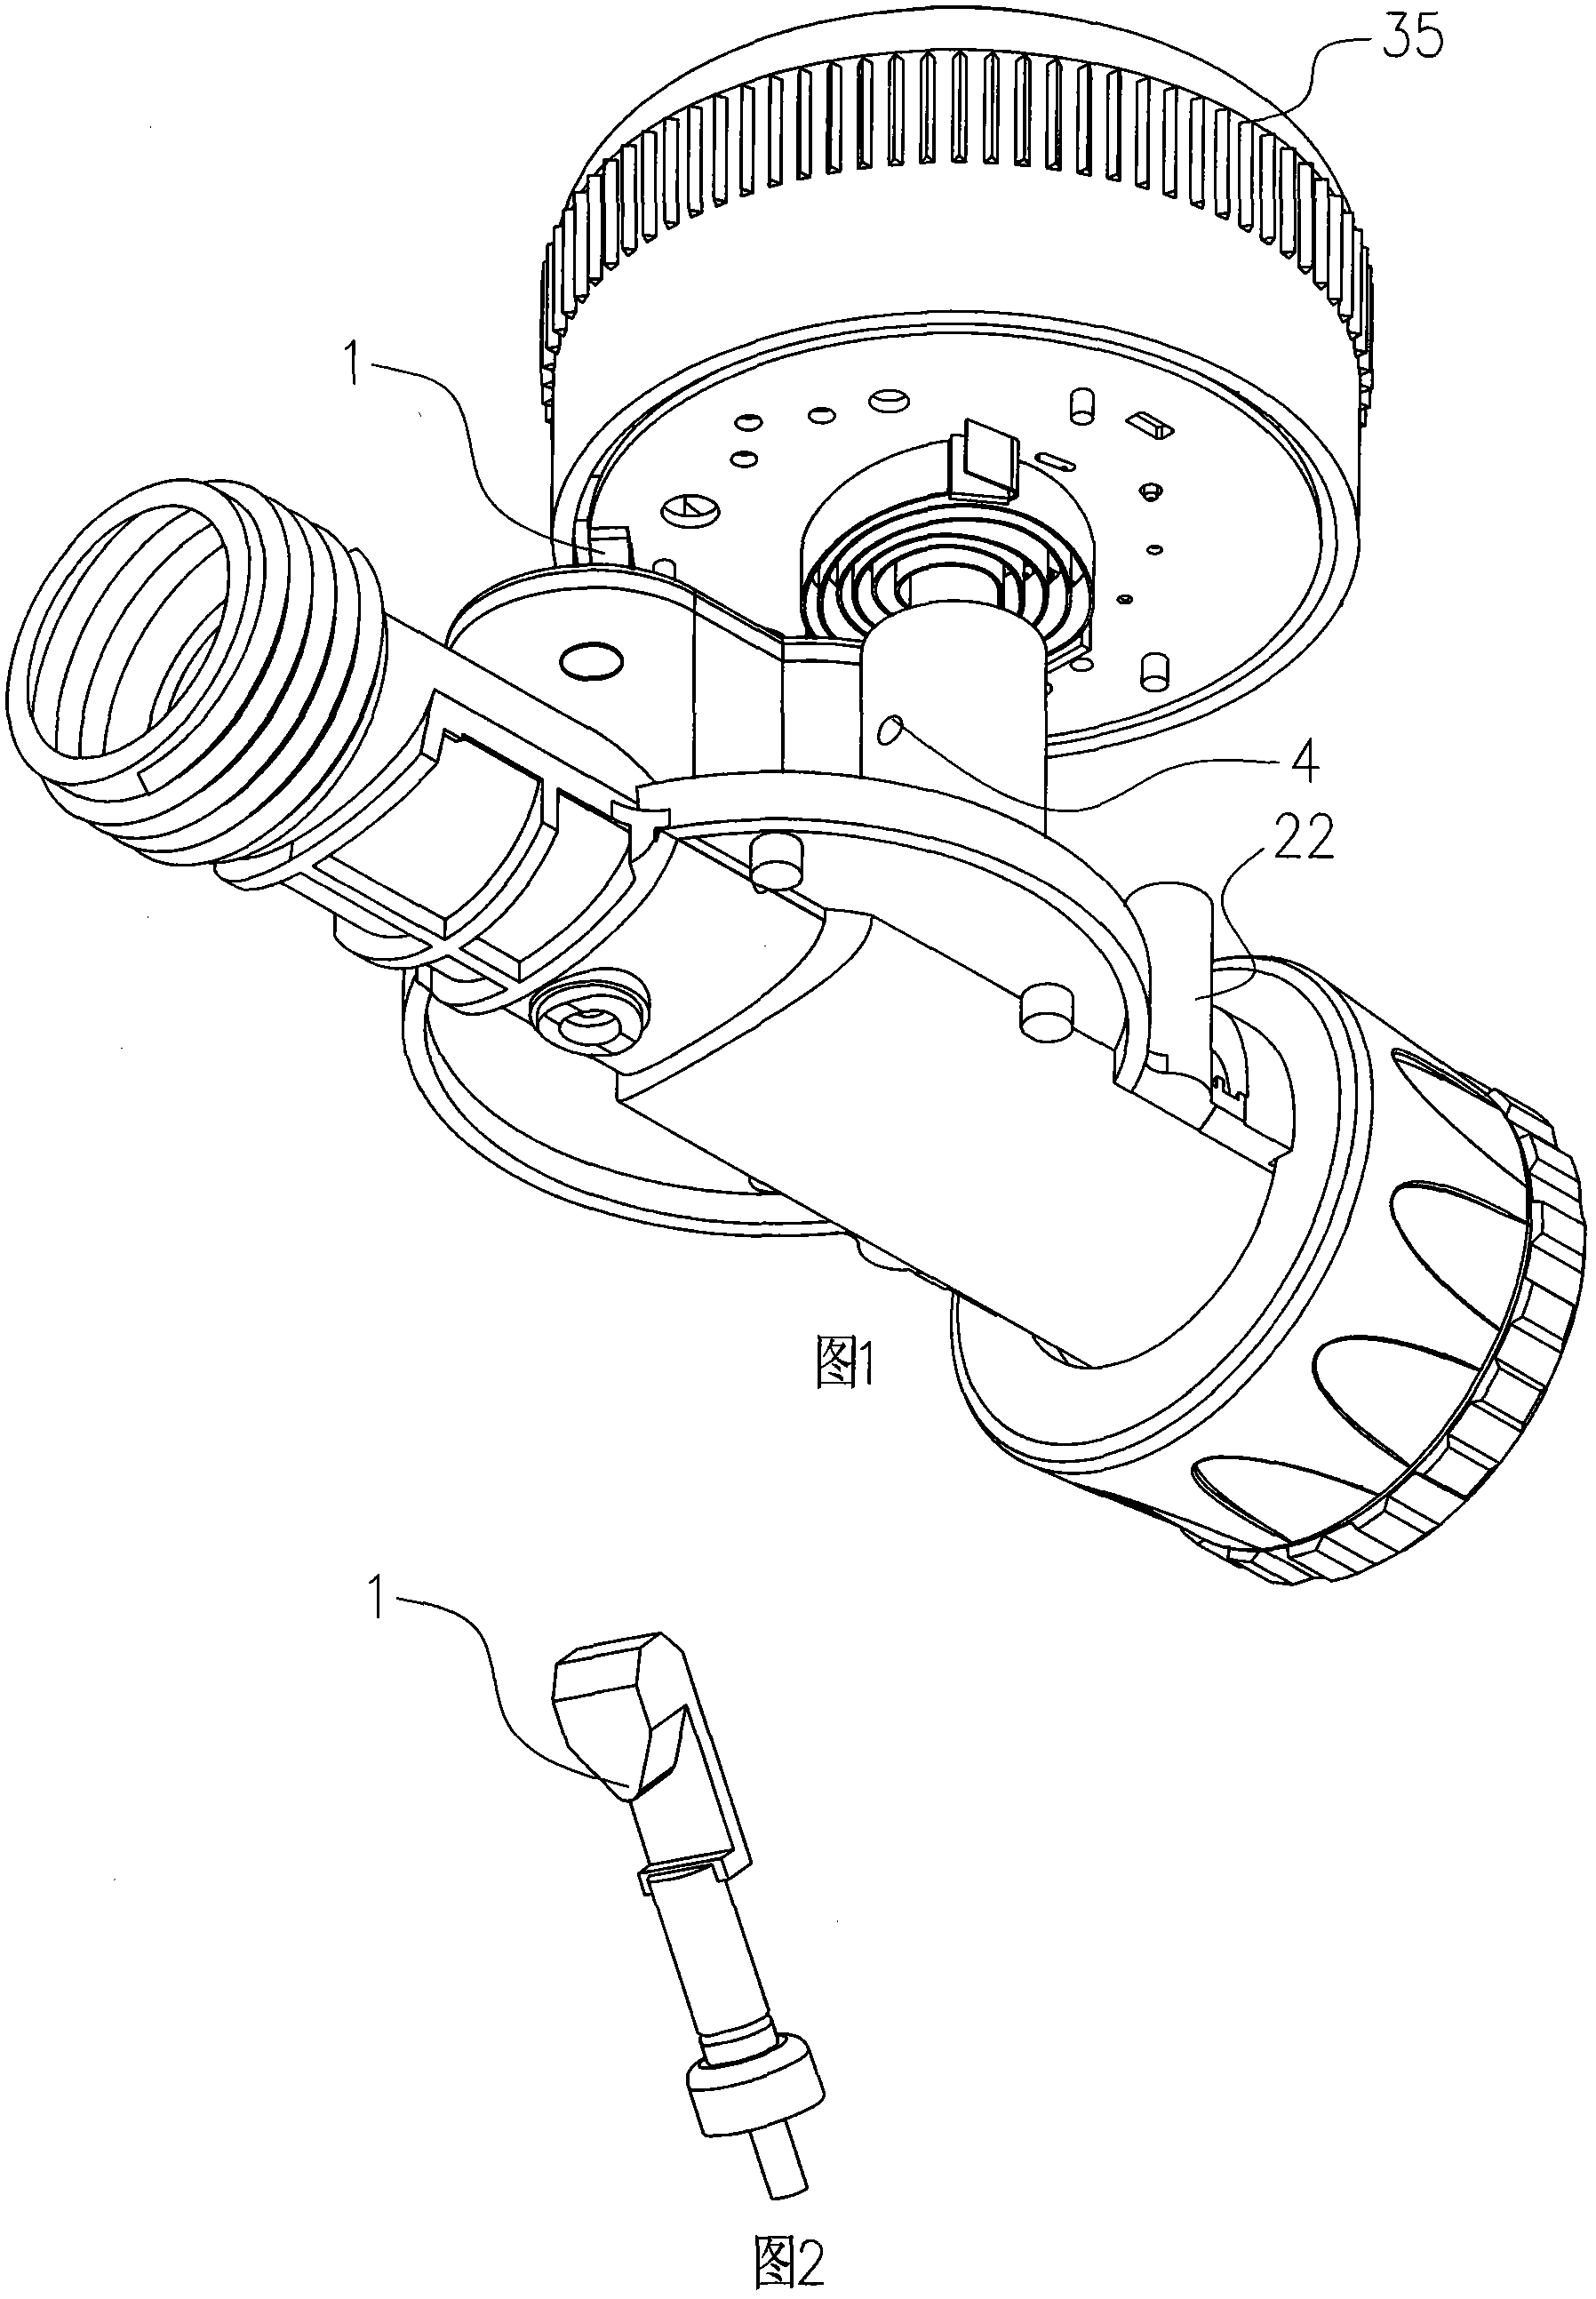 Faucet joint with clamps and combination thereof with timer and sprinkler